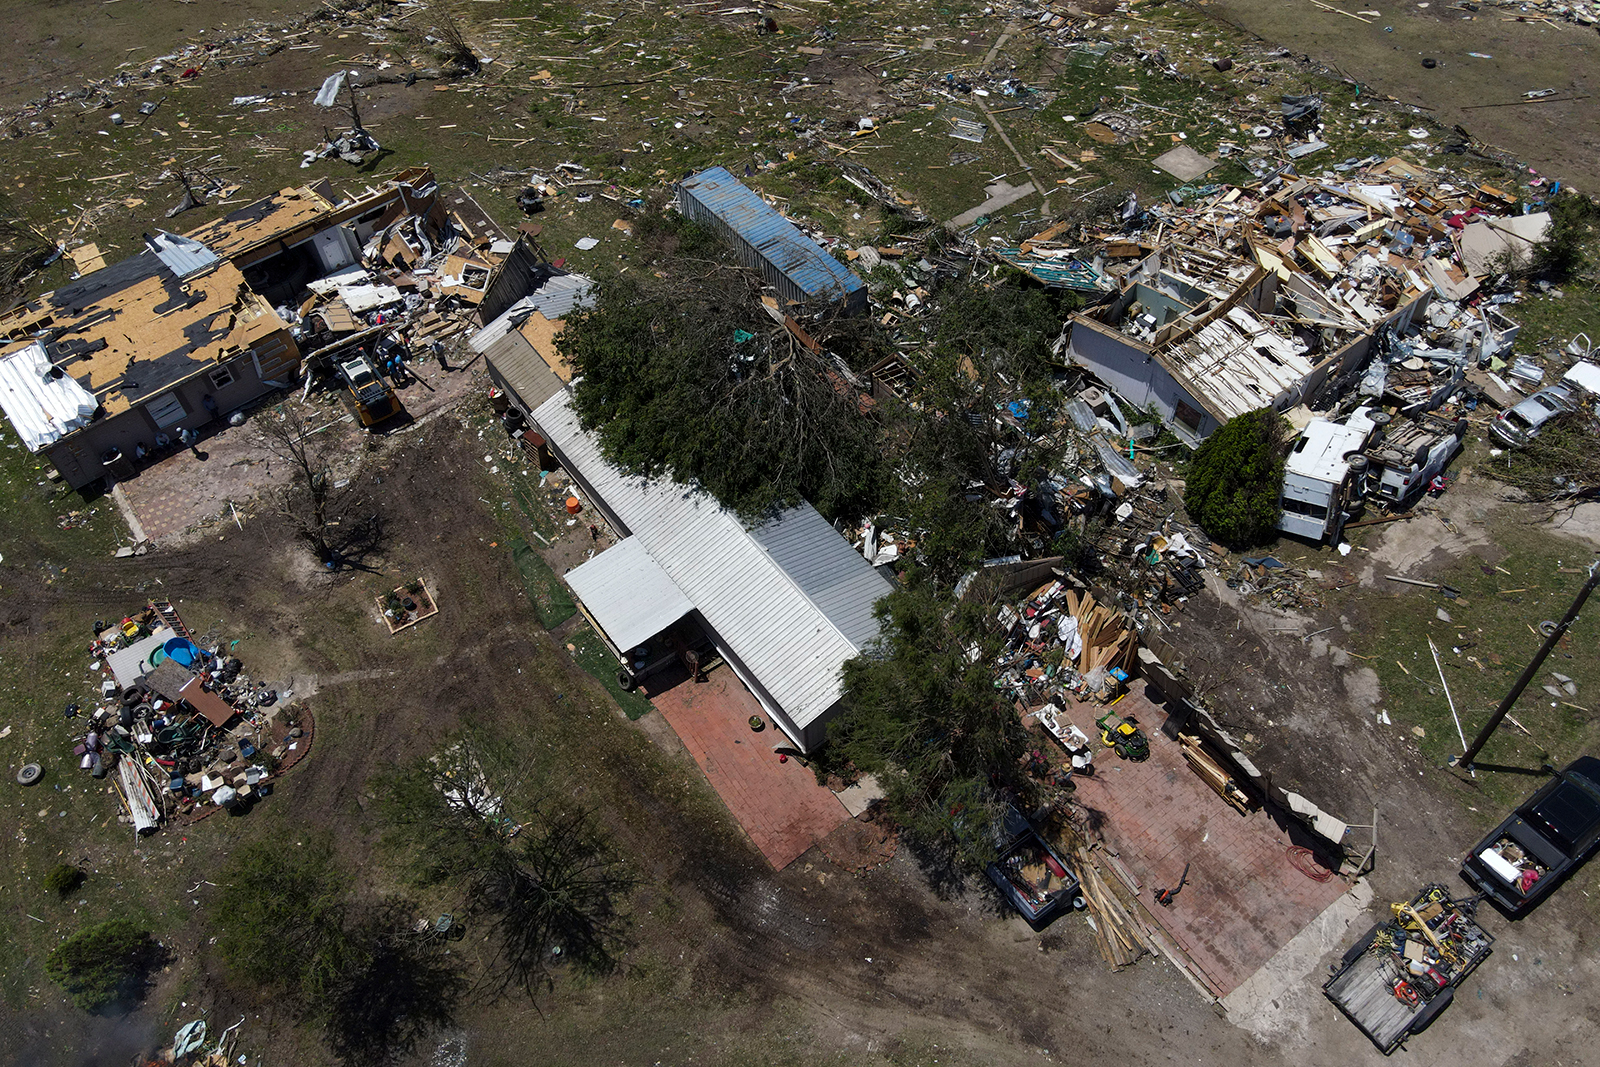 Destroyed homes are seen after a deadly tornado rolled through Valley View, Texas on May 26.